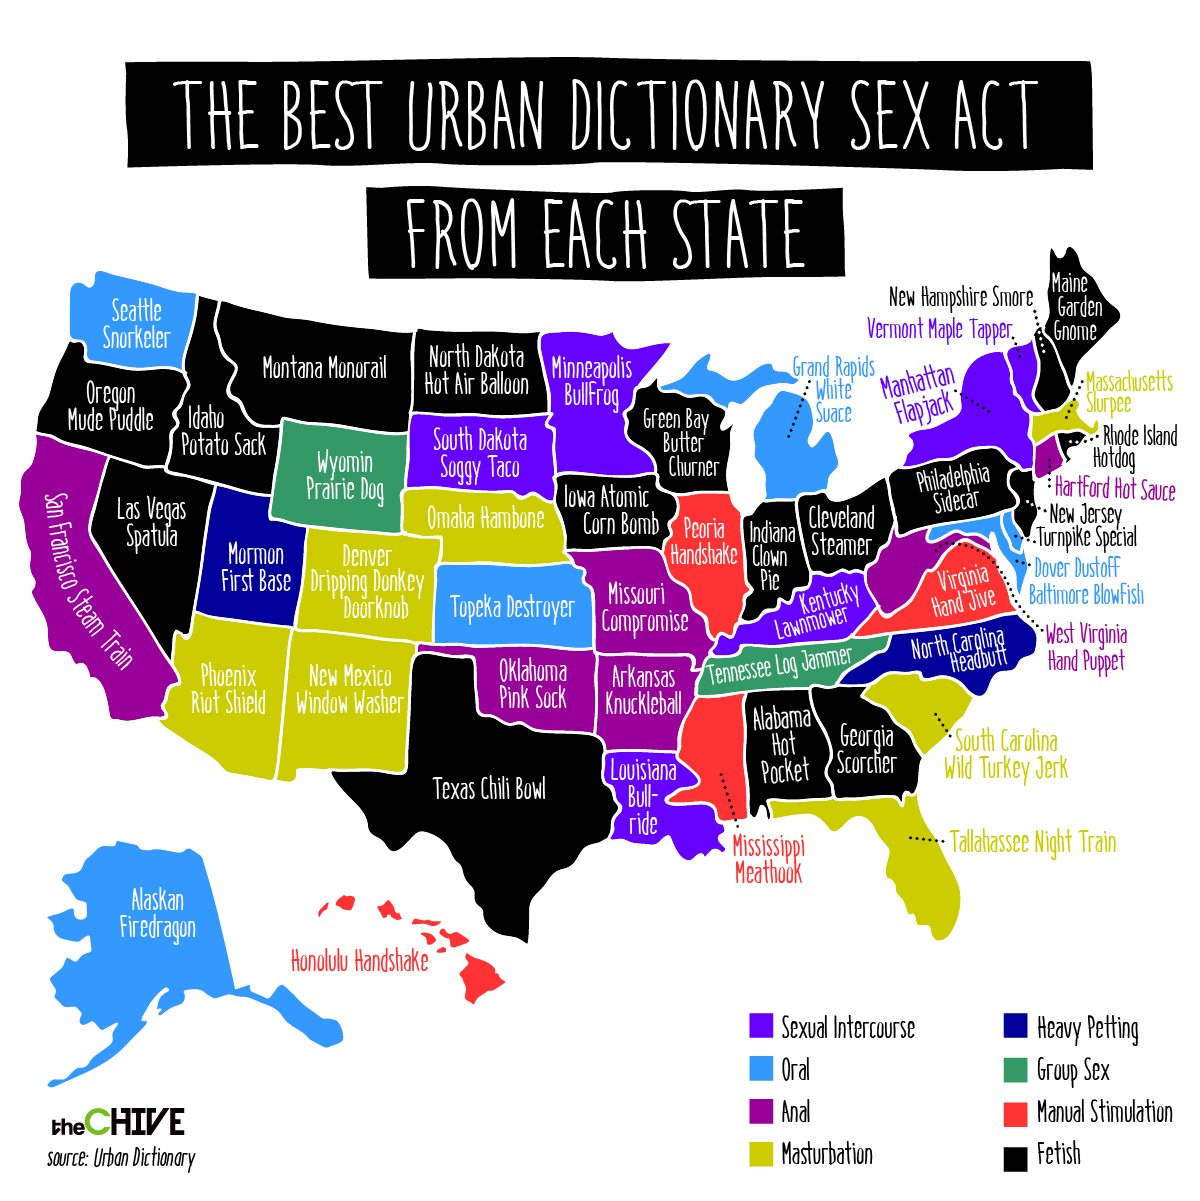 Here’s The "Best" Urban Dictionary Sex Act From Each State.